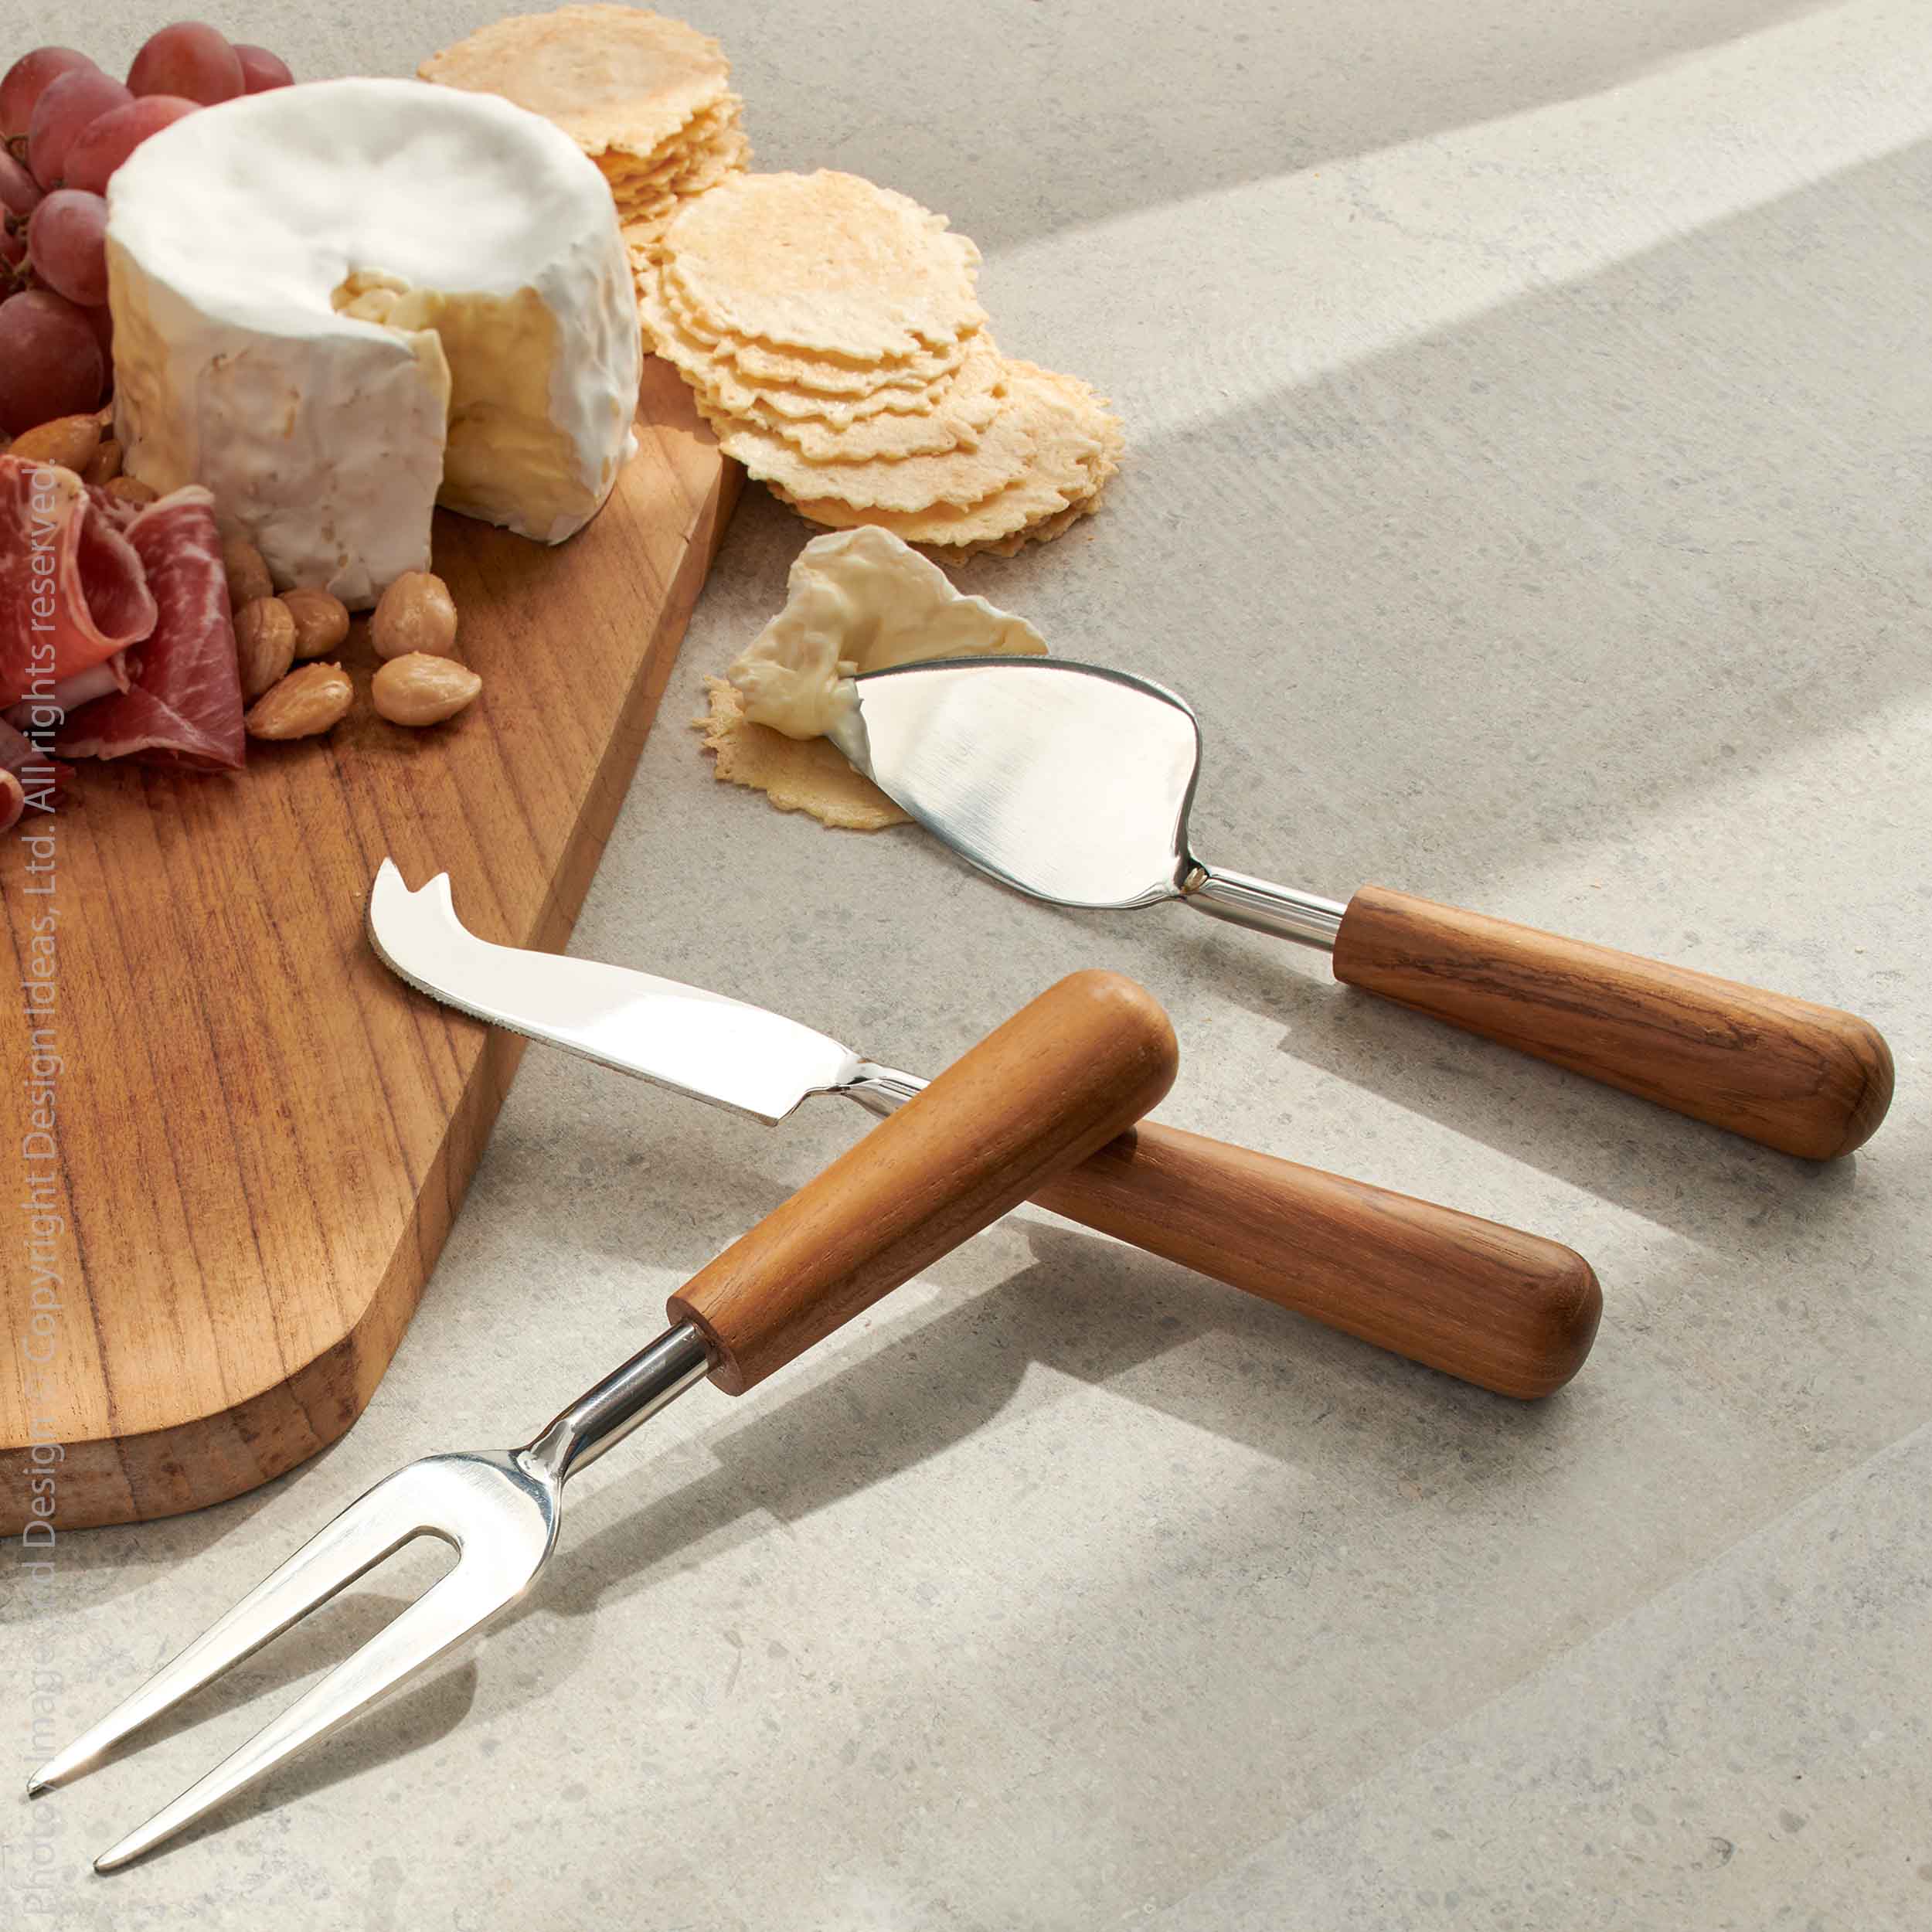 Fulton™ Handmade Stainless Steel and Acacia Wood Cheese Knives (set of 3) - (colors: Natural) | Premium Utensils from the Fulton™ collection | made with Stainless Steel and Acacia Wood for long lasting use